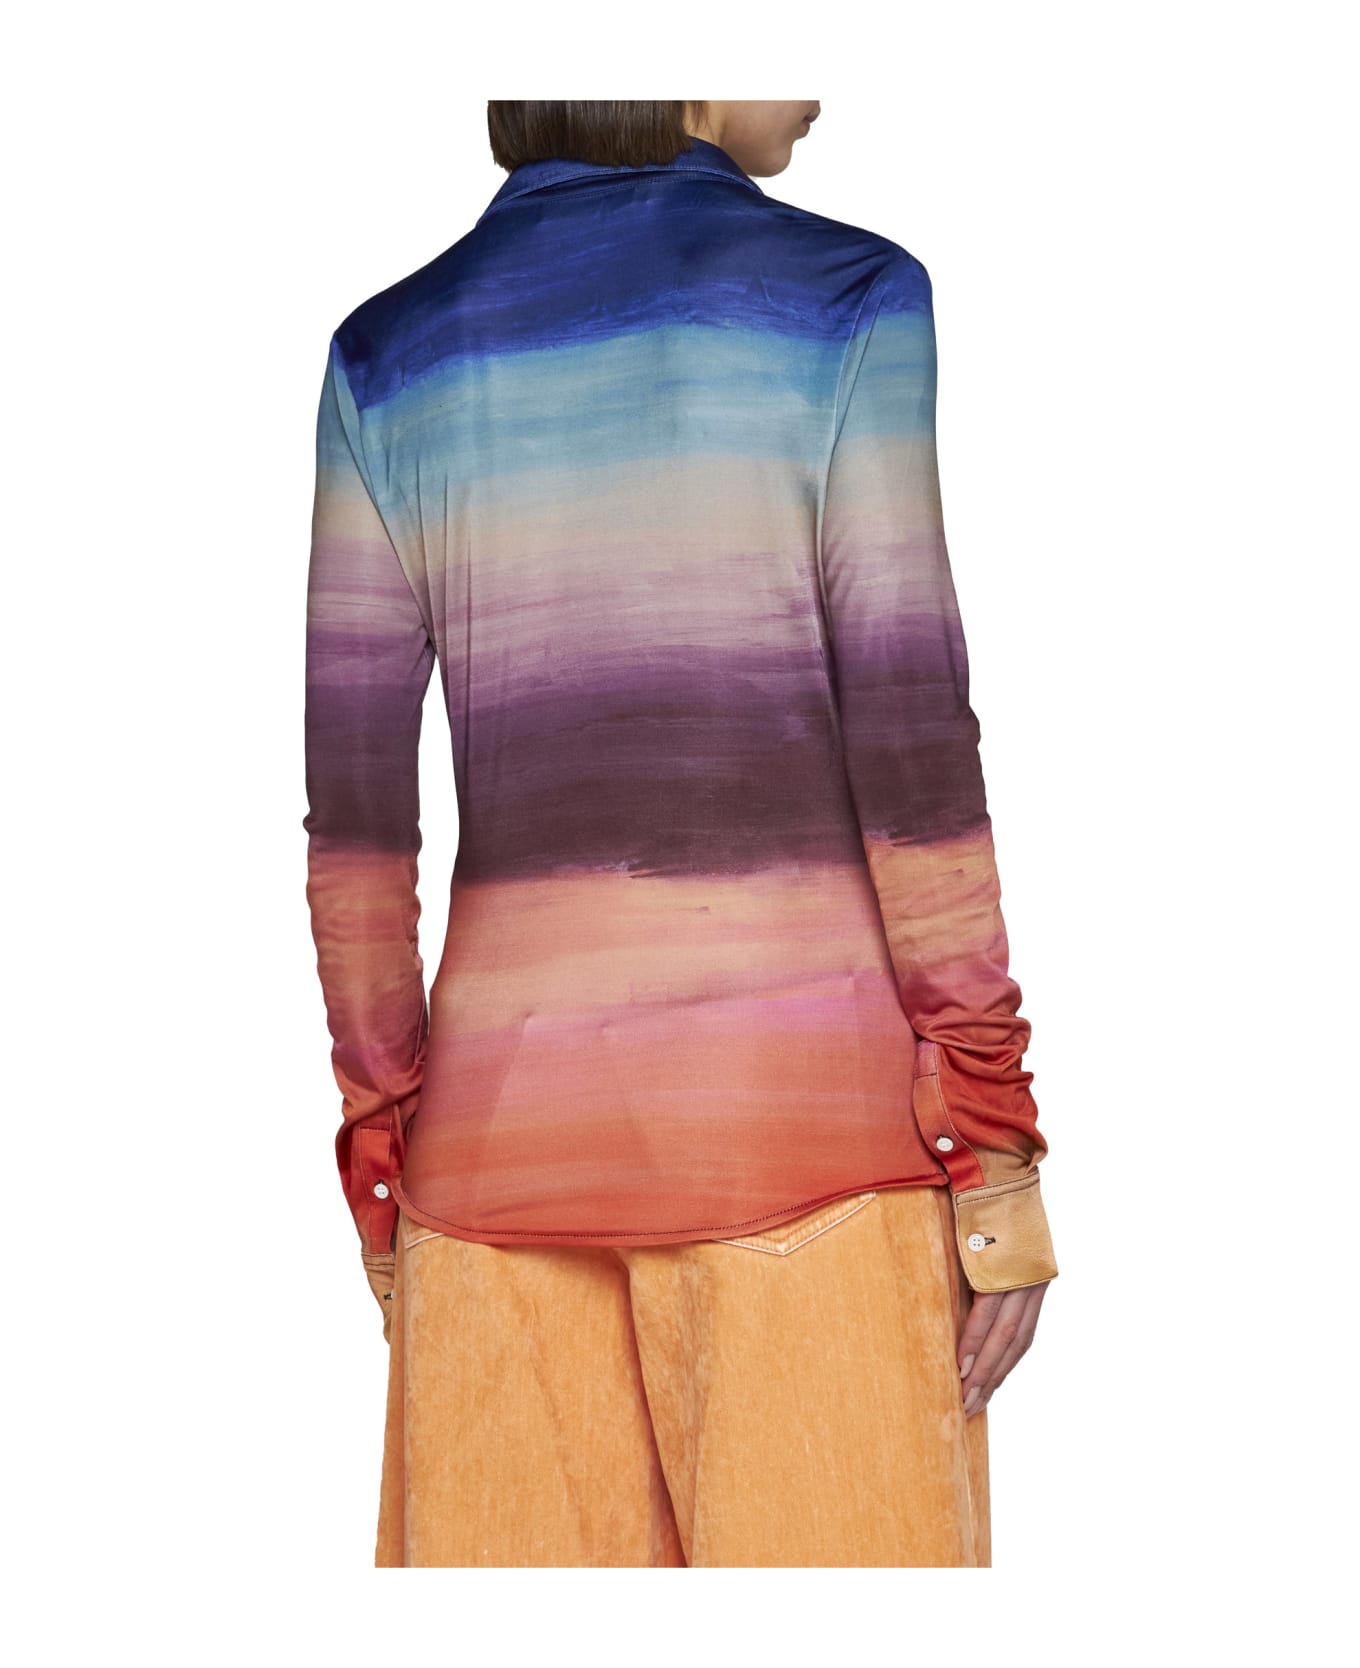 Marni Multicoloured Jersey Shirt With Dark Side Of The Moon Print - MULTICOLORE シャツ